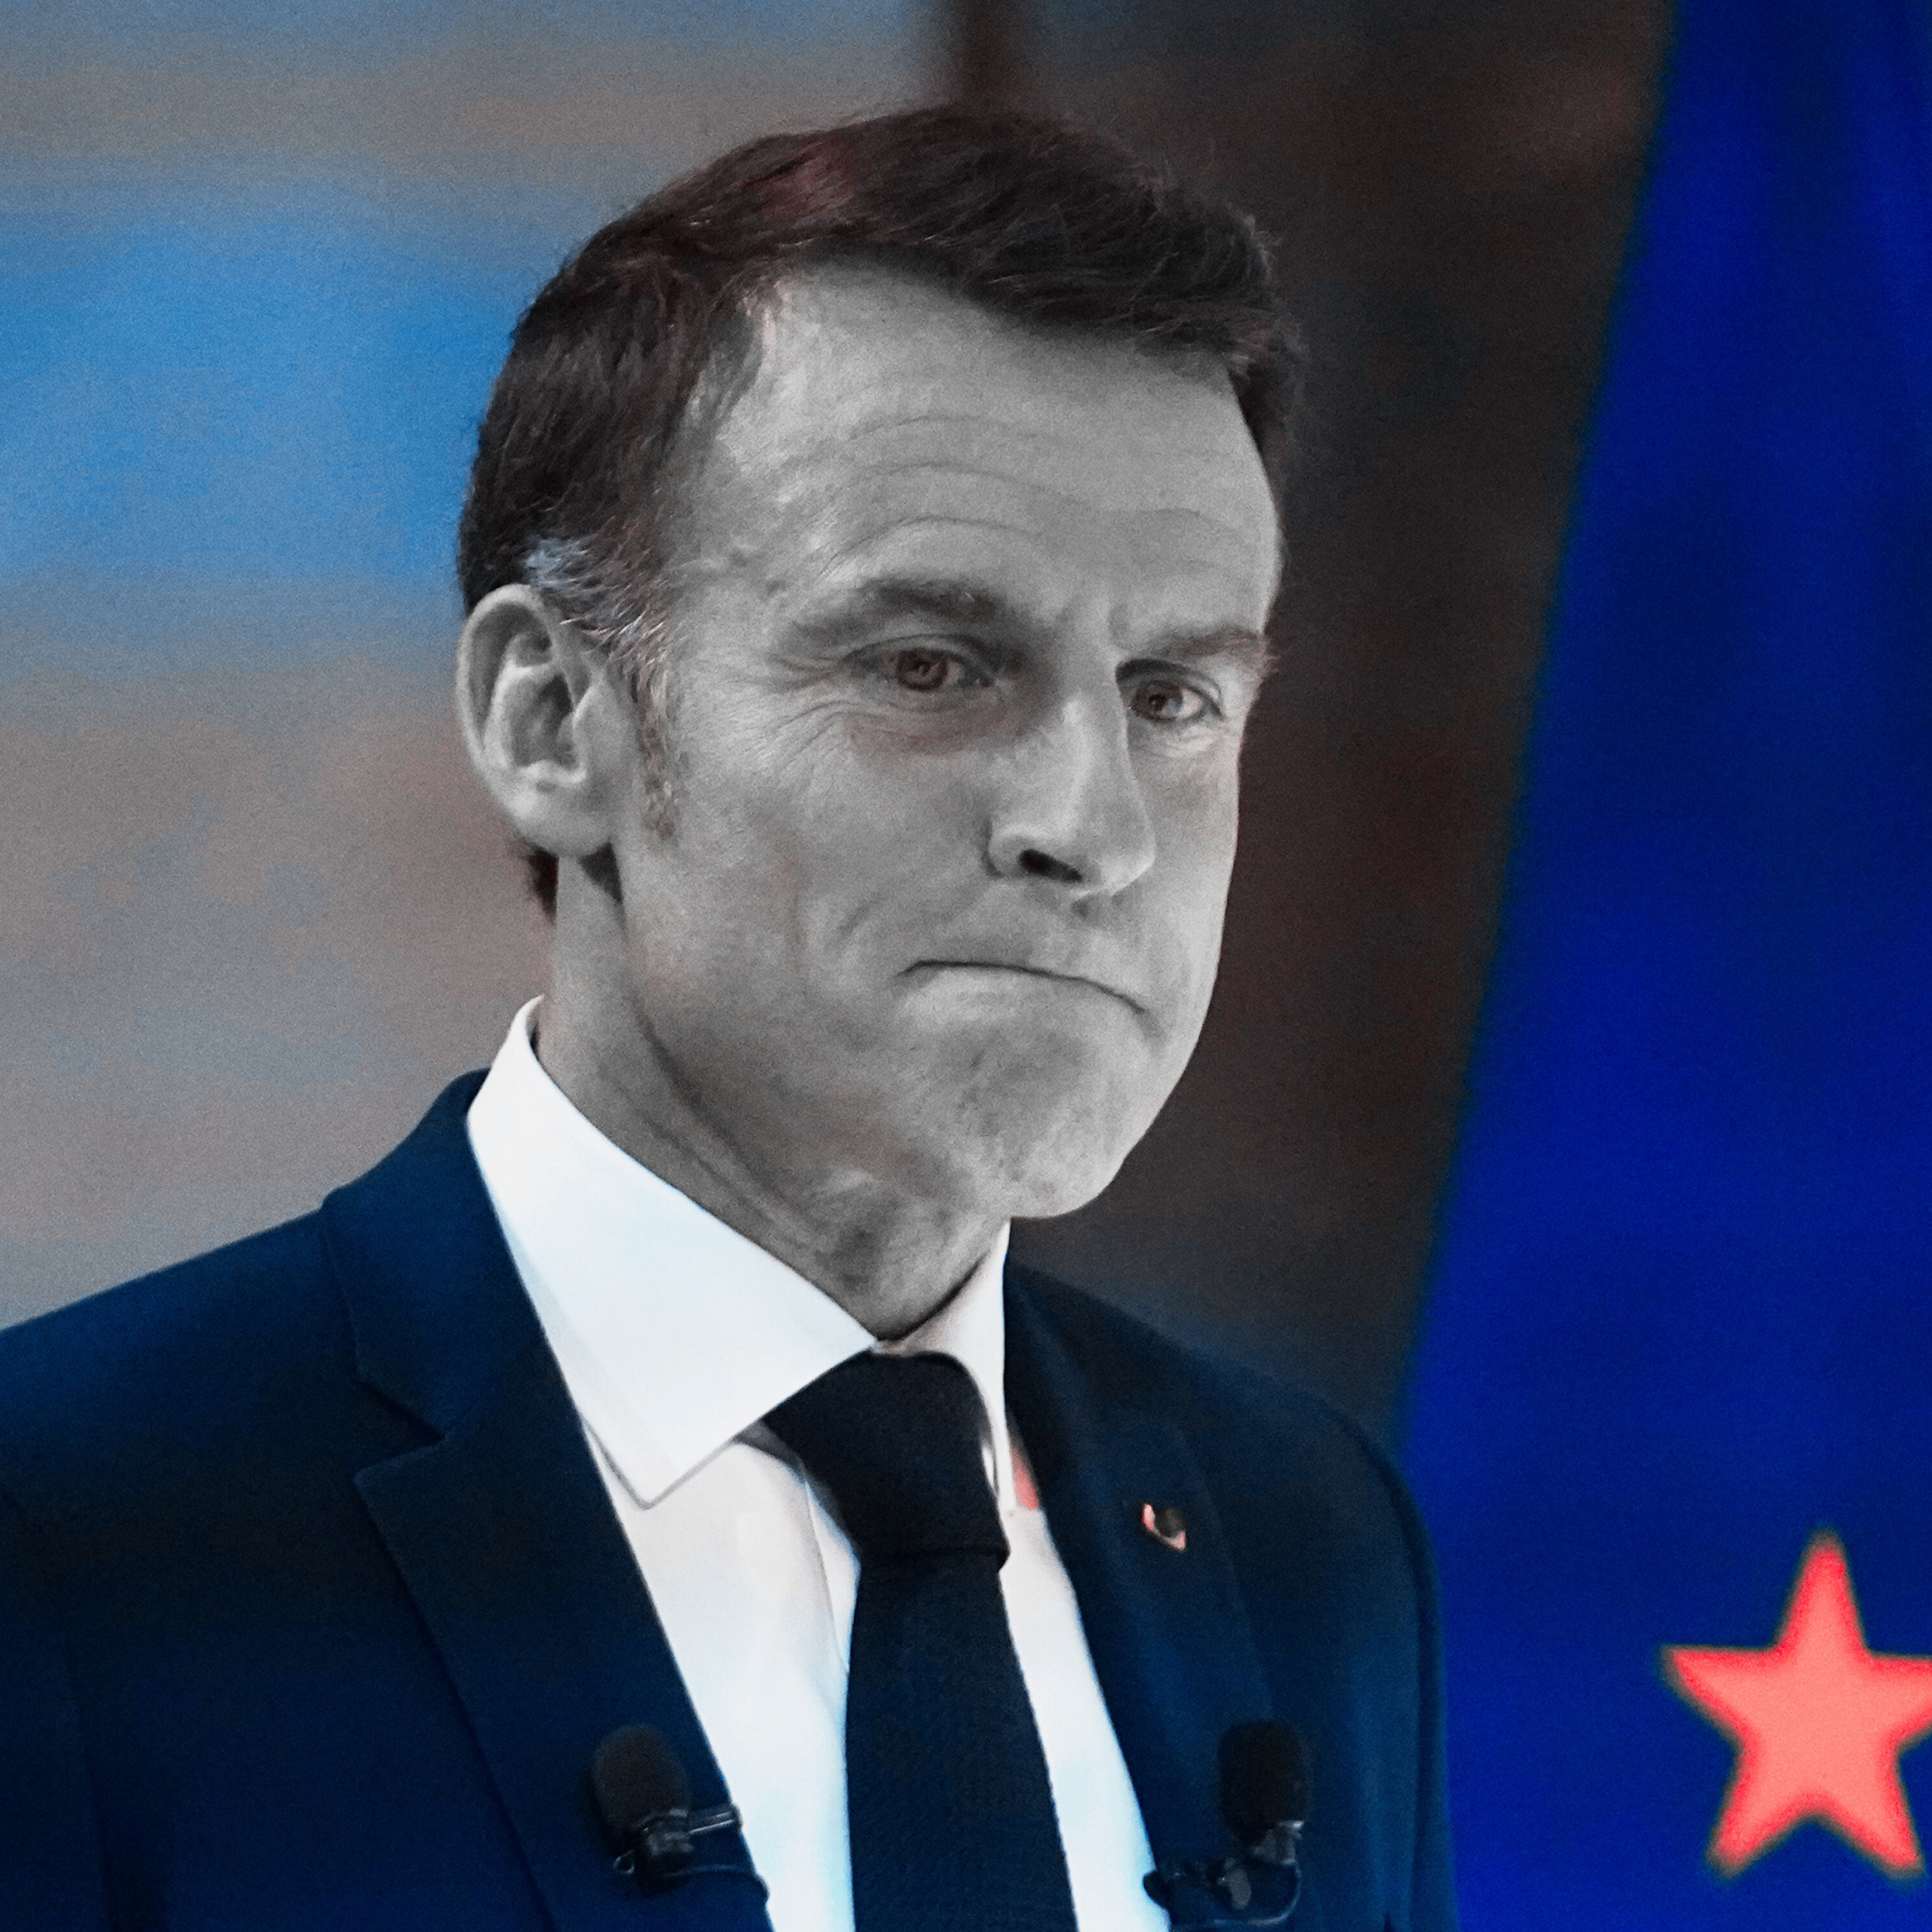 Explainer: What’s at stake in France’s election, and could it make Macron’s government even weaker?